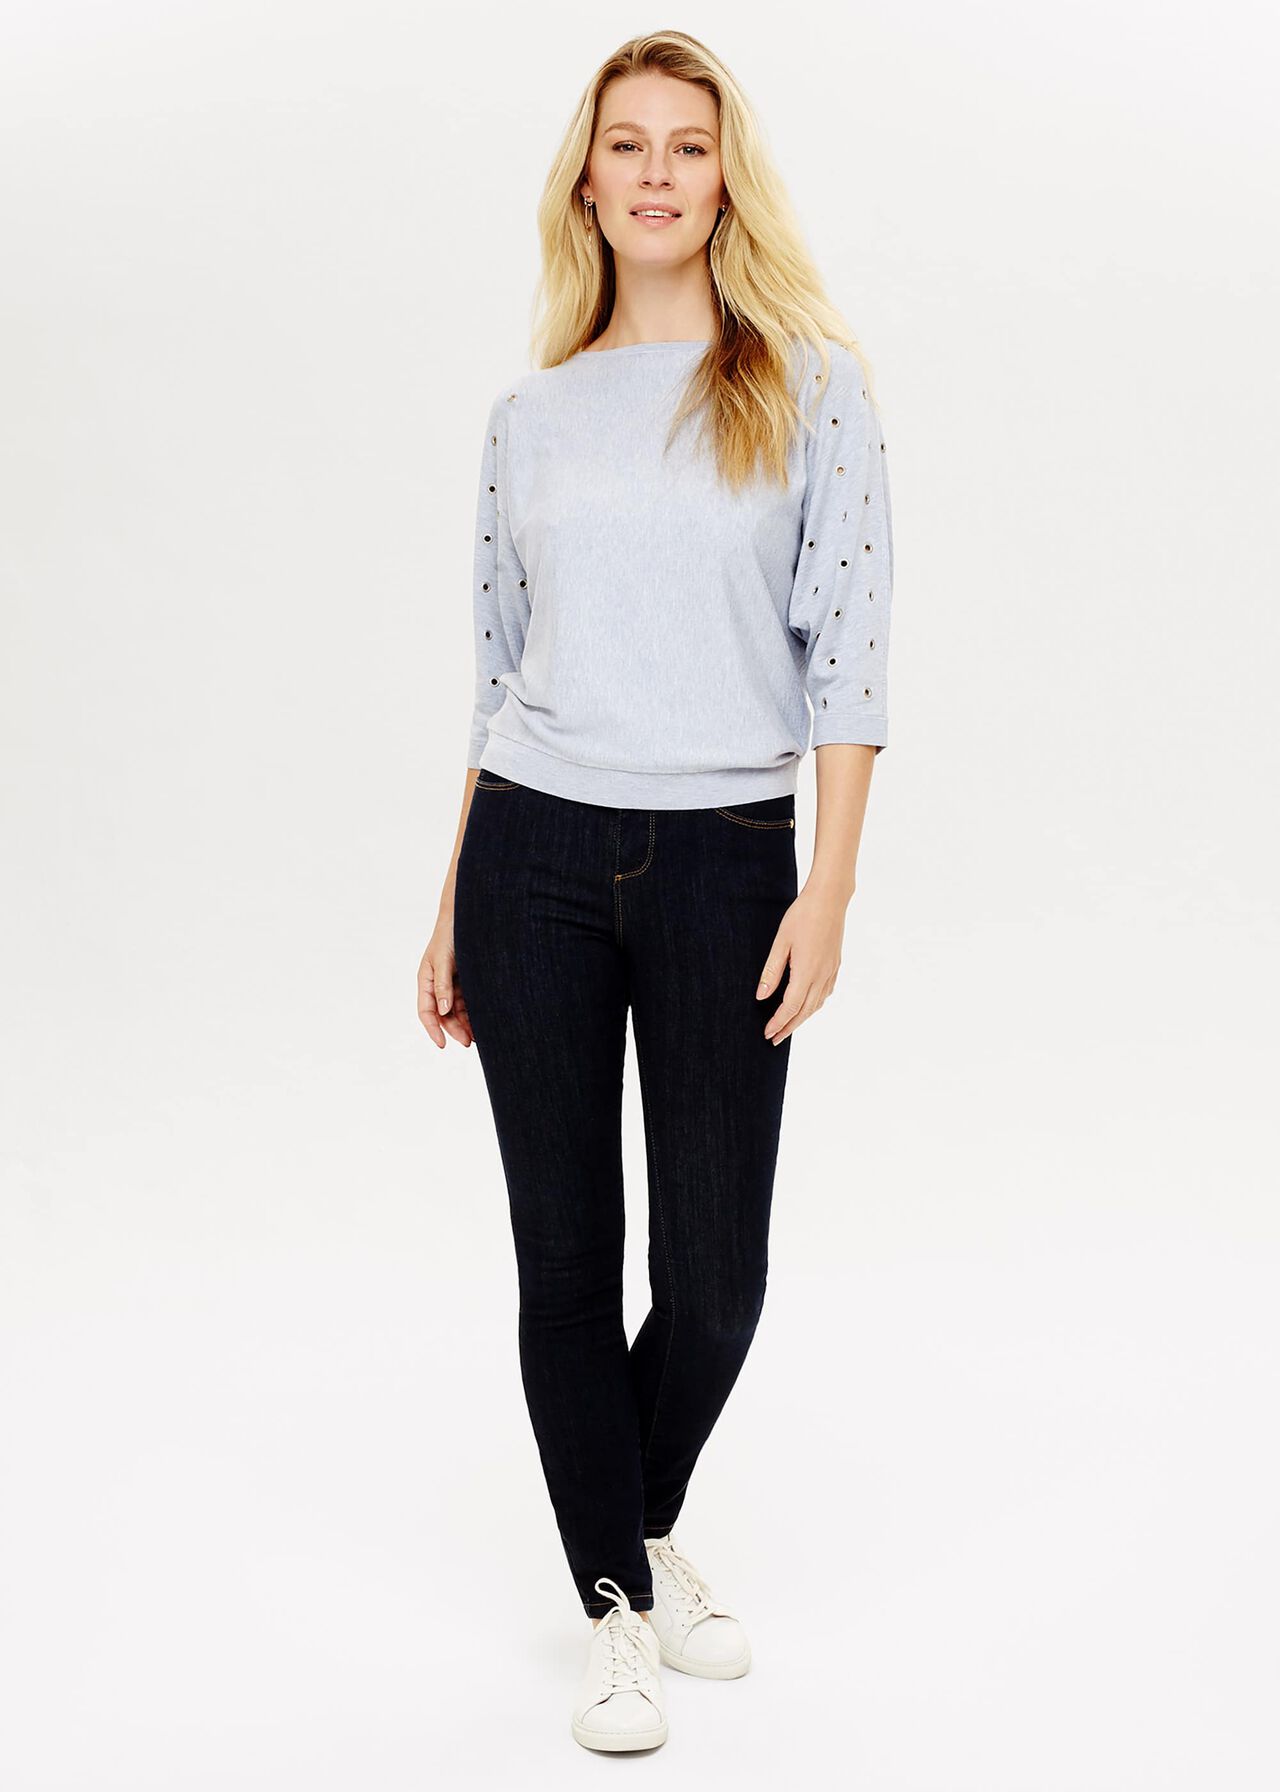 Cristine Eyelet Knitted Top